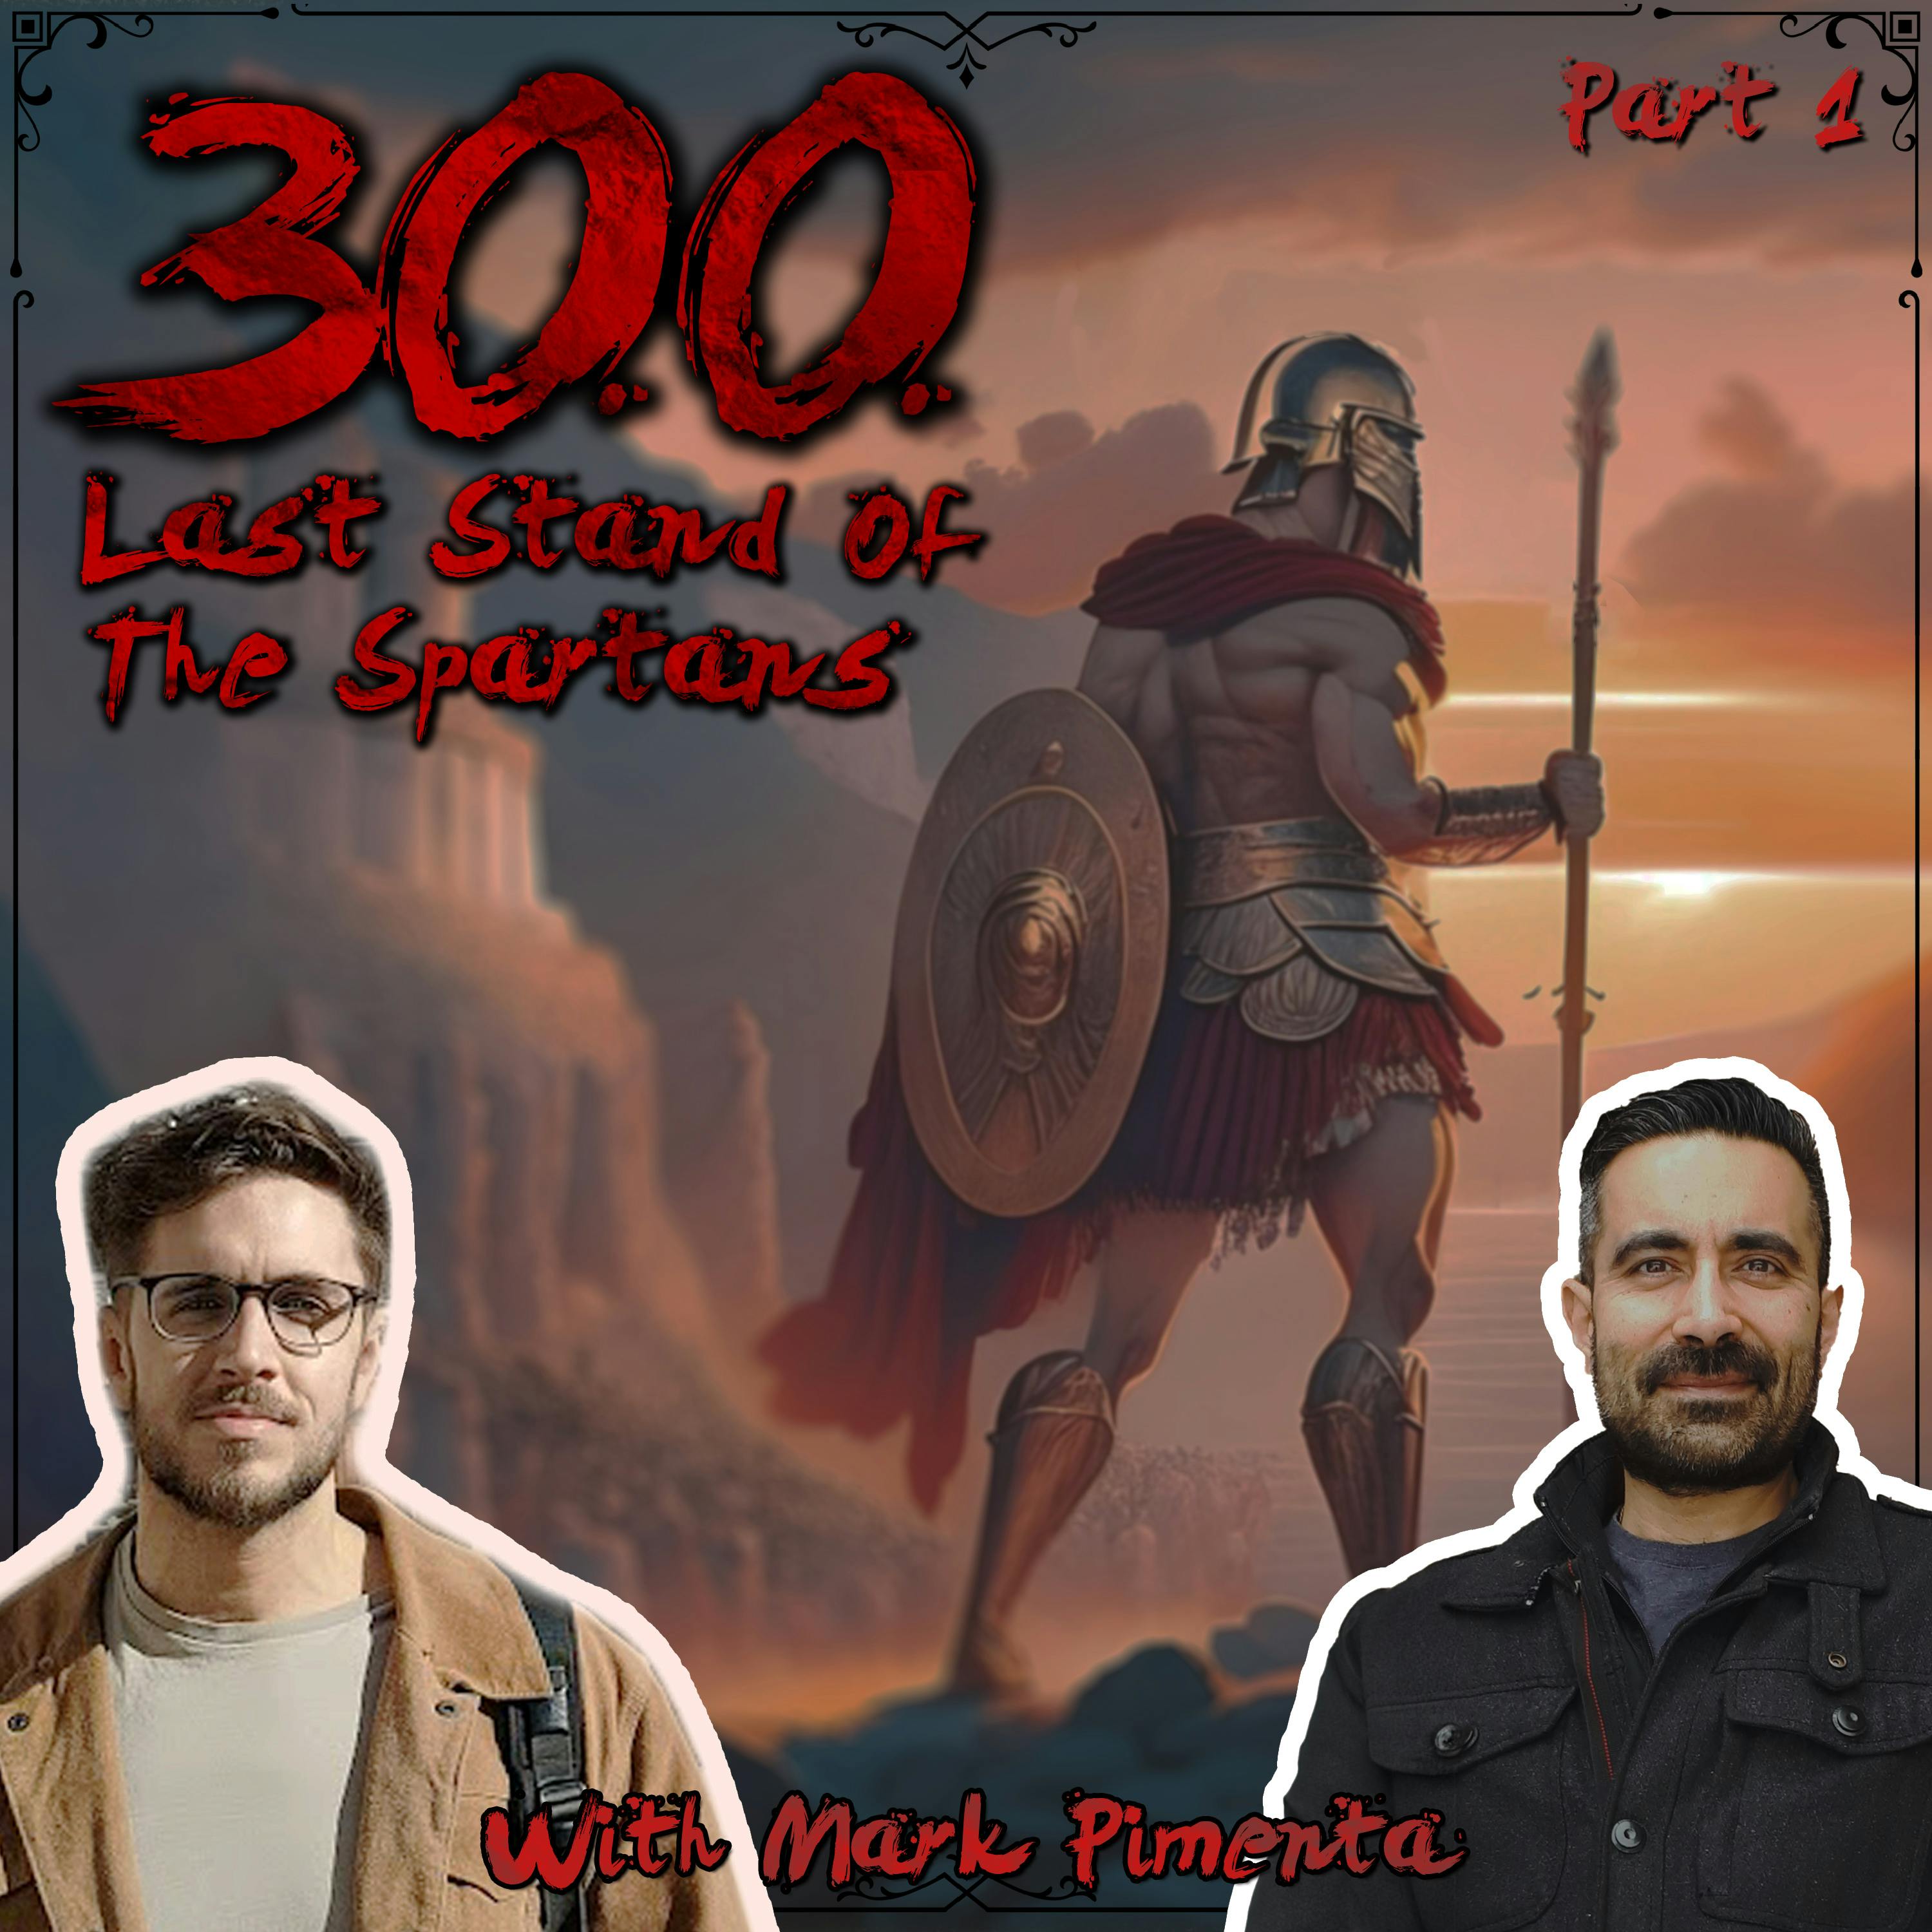 300: Last Stand of The Spartans | Part 1